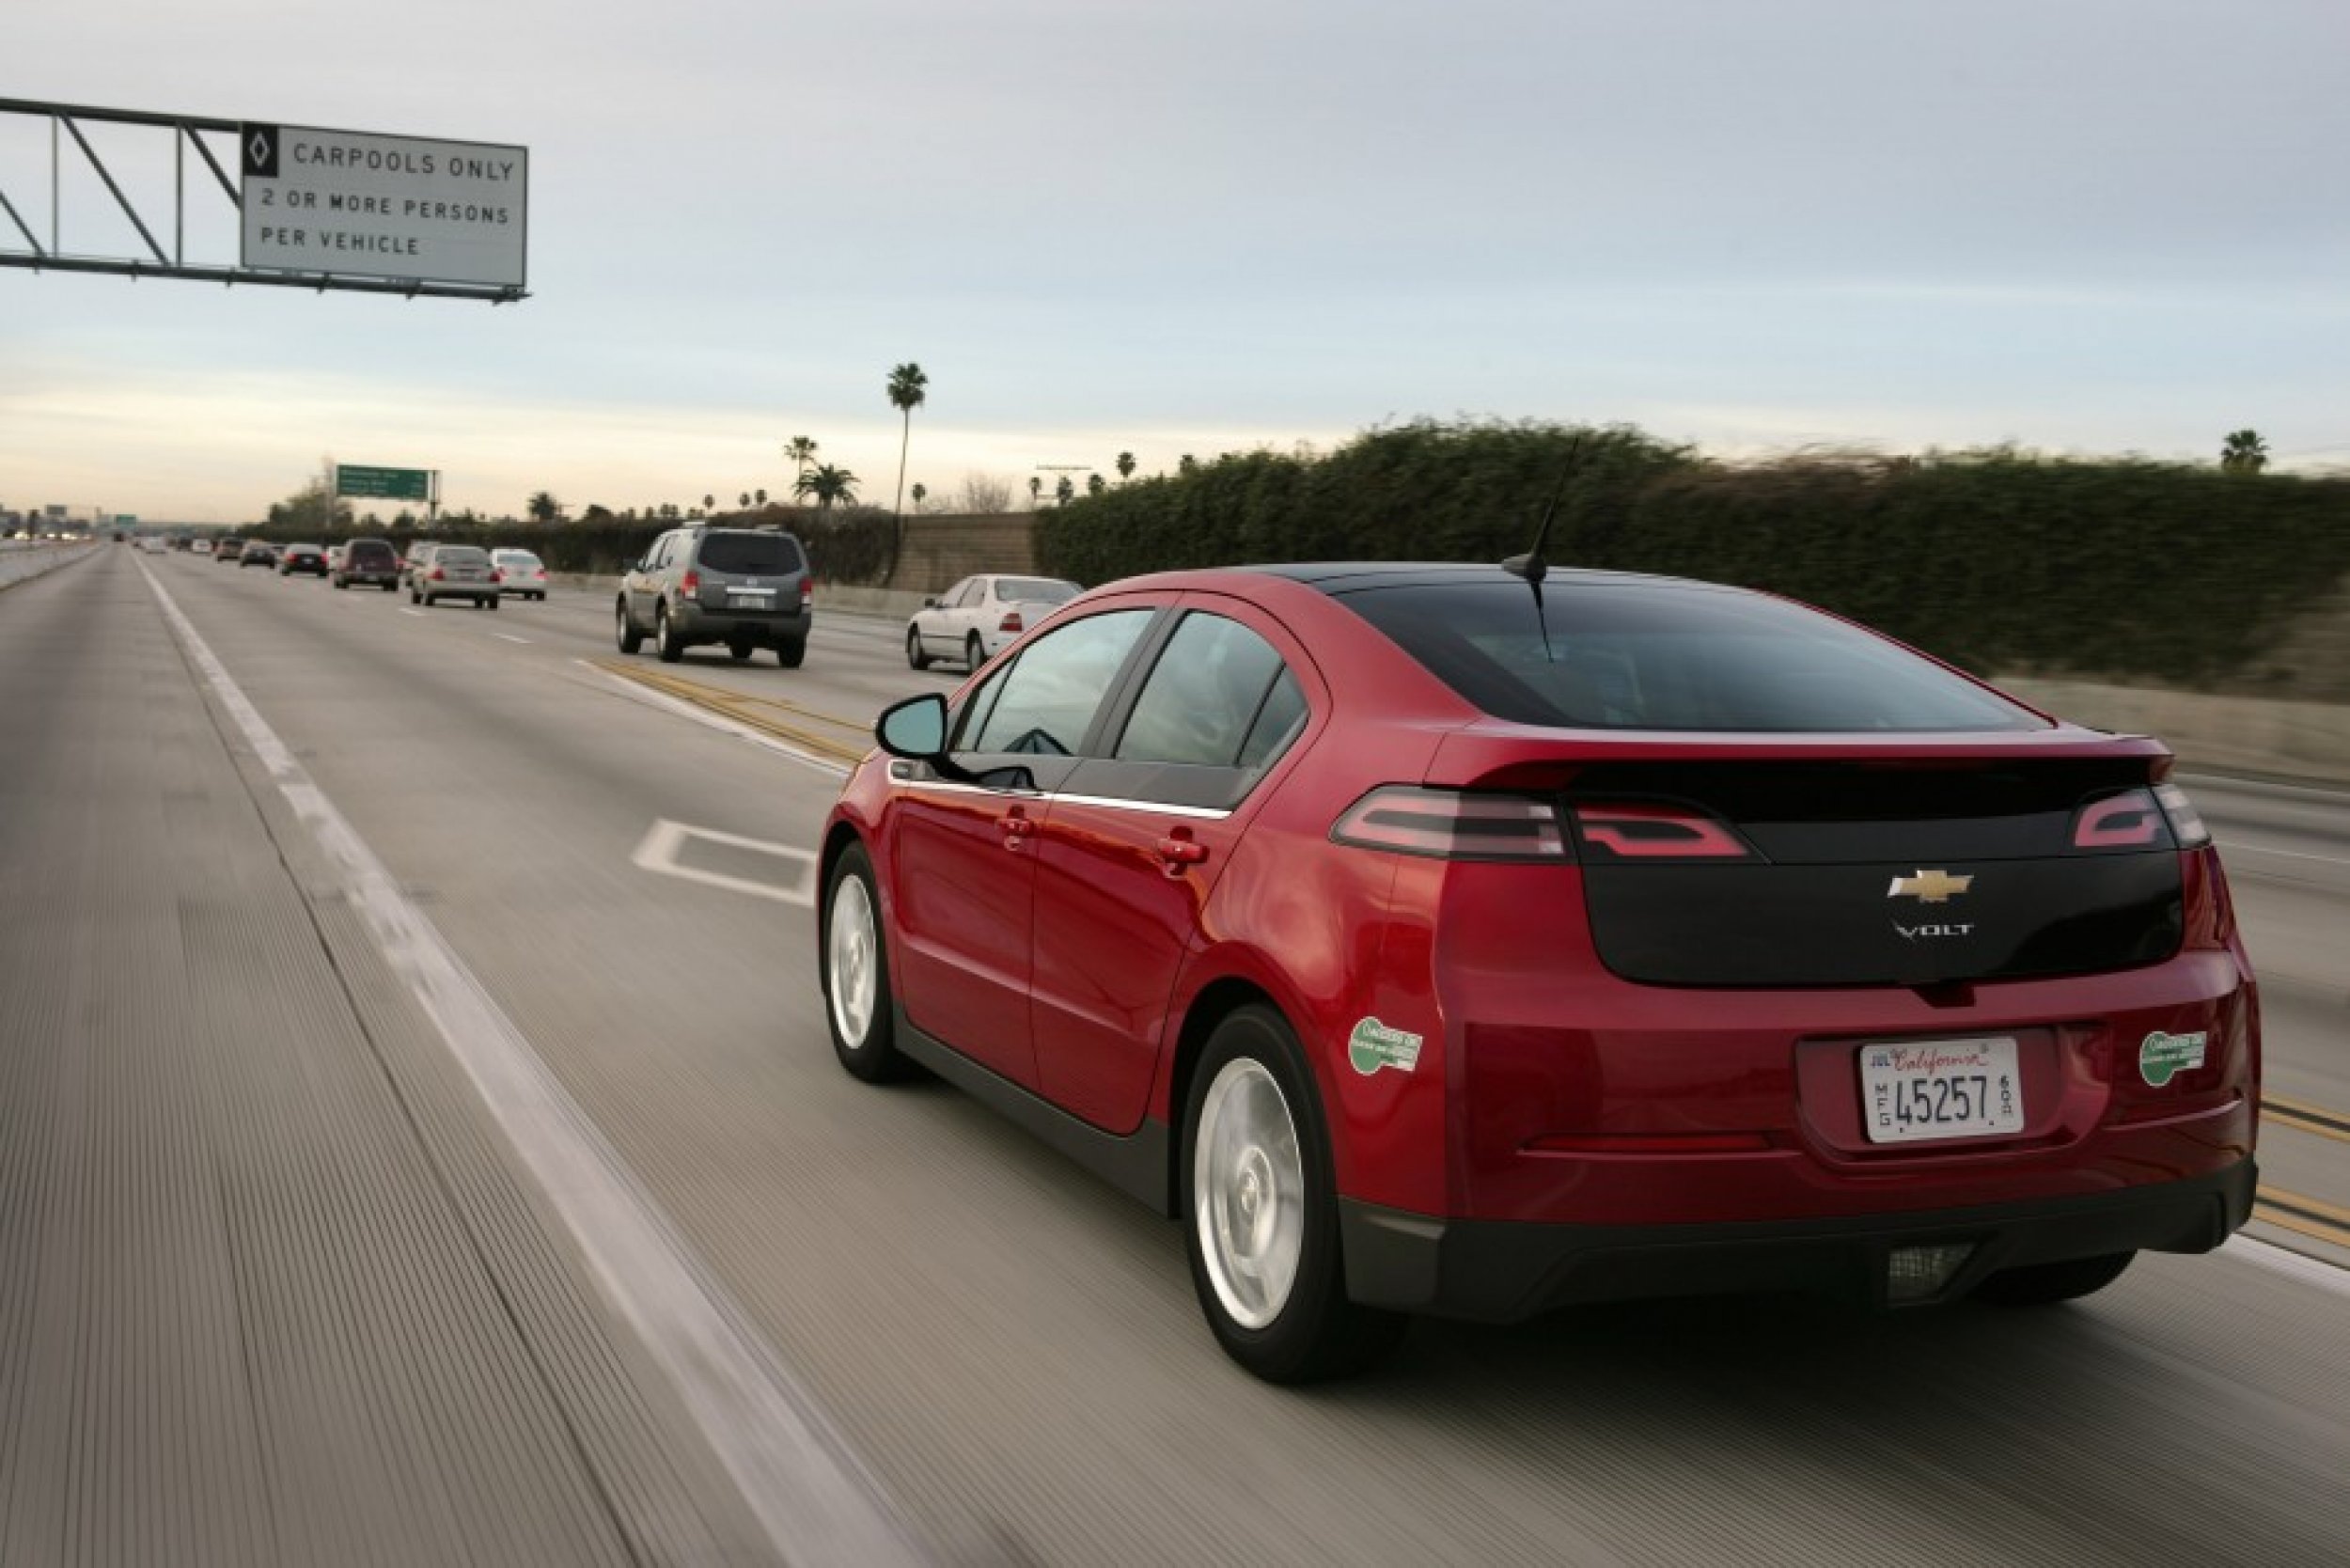 hov-lane-access-drives-electric-car-sales-in-california